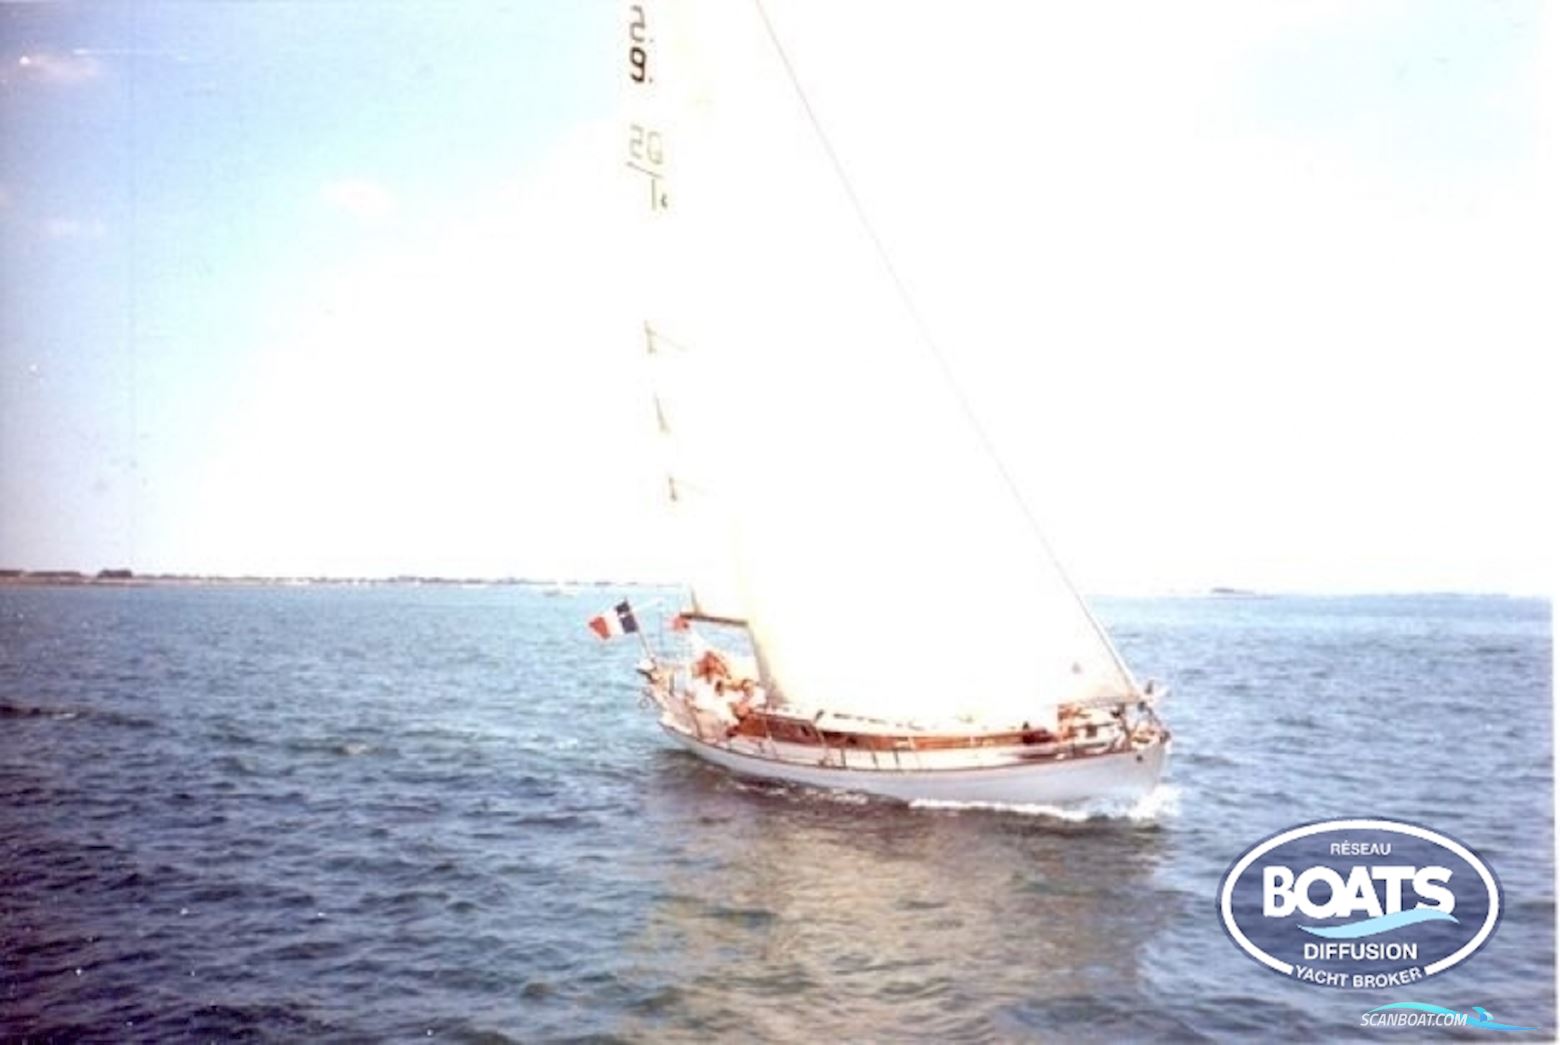 Quirouard et Frileuse Sloop Illingworth Sailing boat 1954, with Nannidiesel engine, France